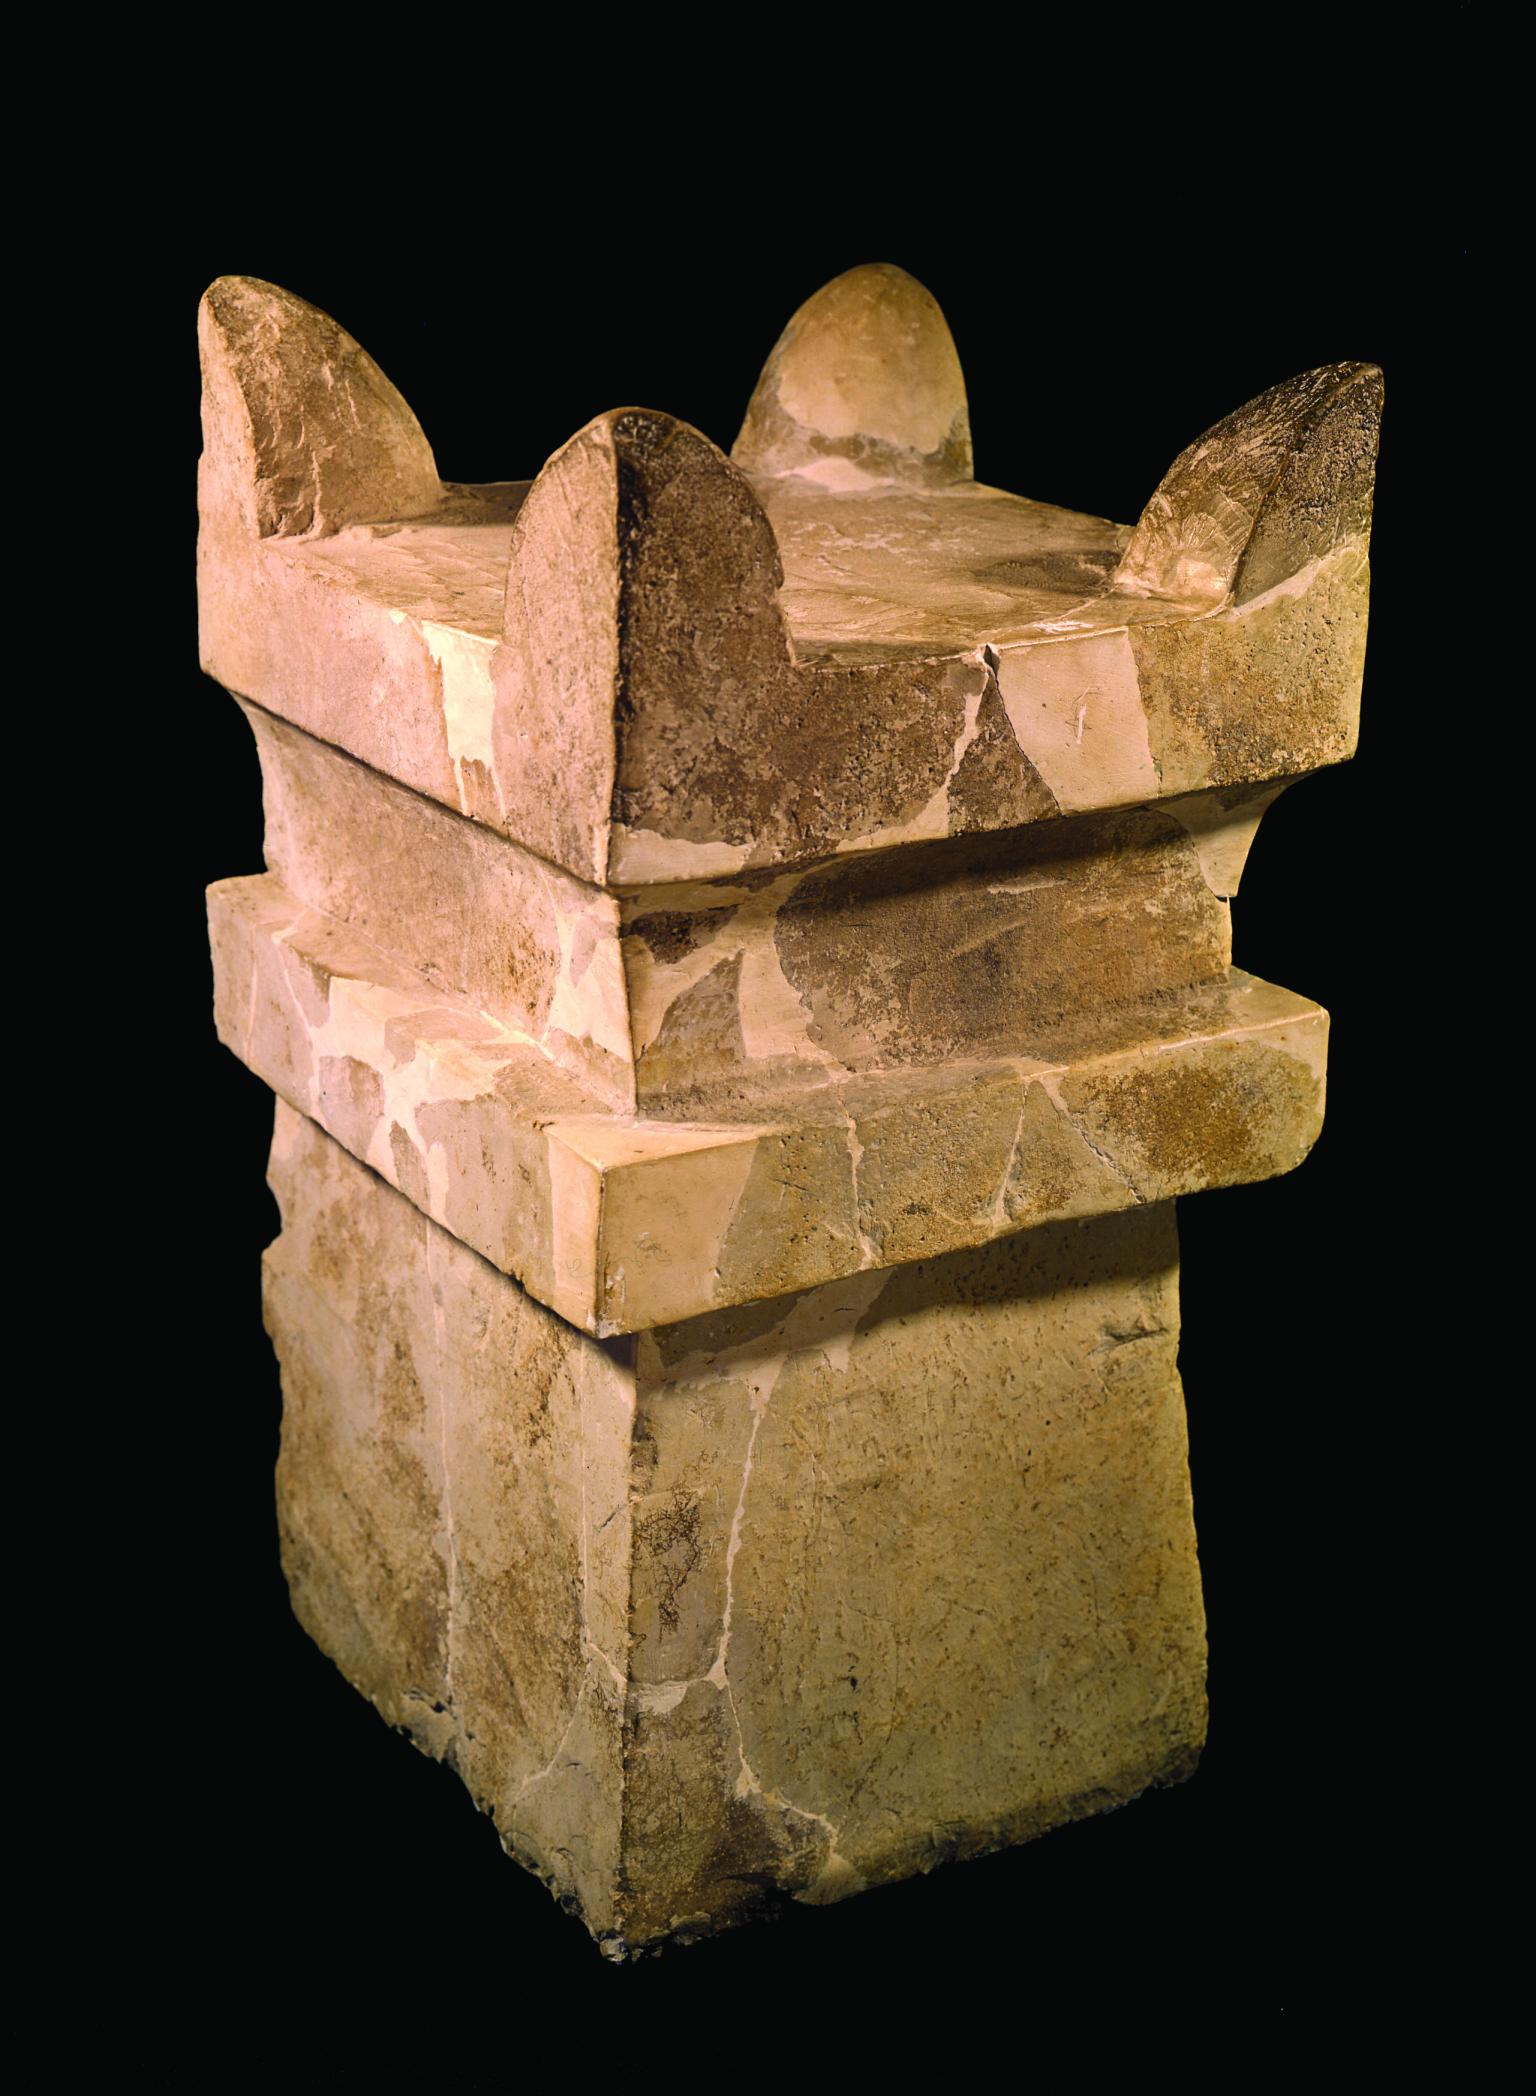 Square limestone altar with horns at four upper corners and recessed band below offering surface.